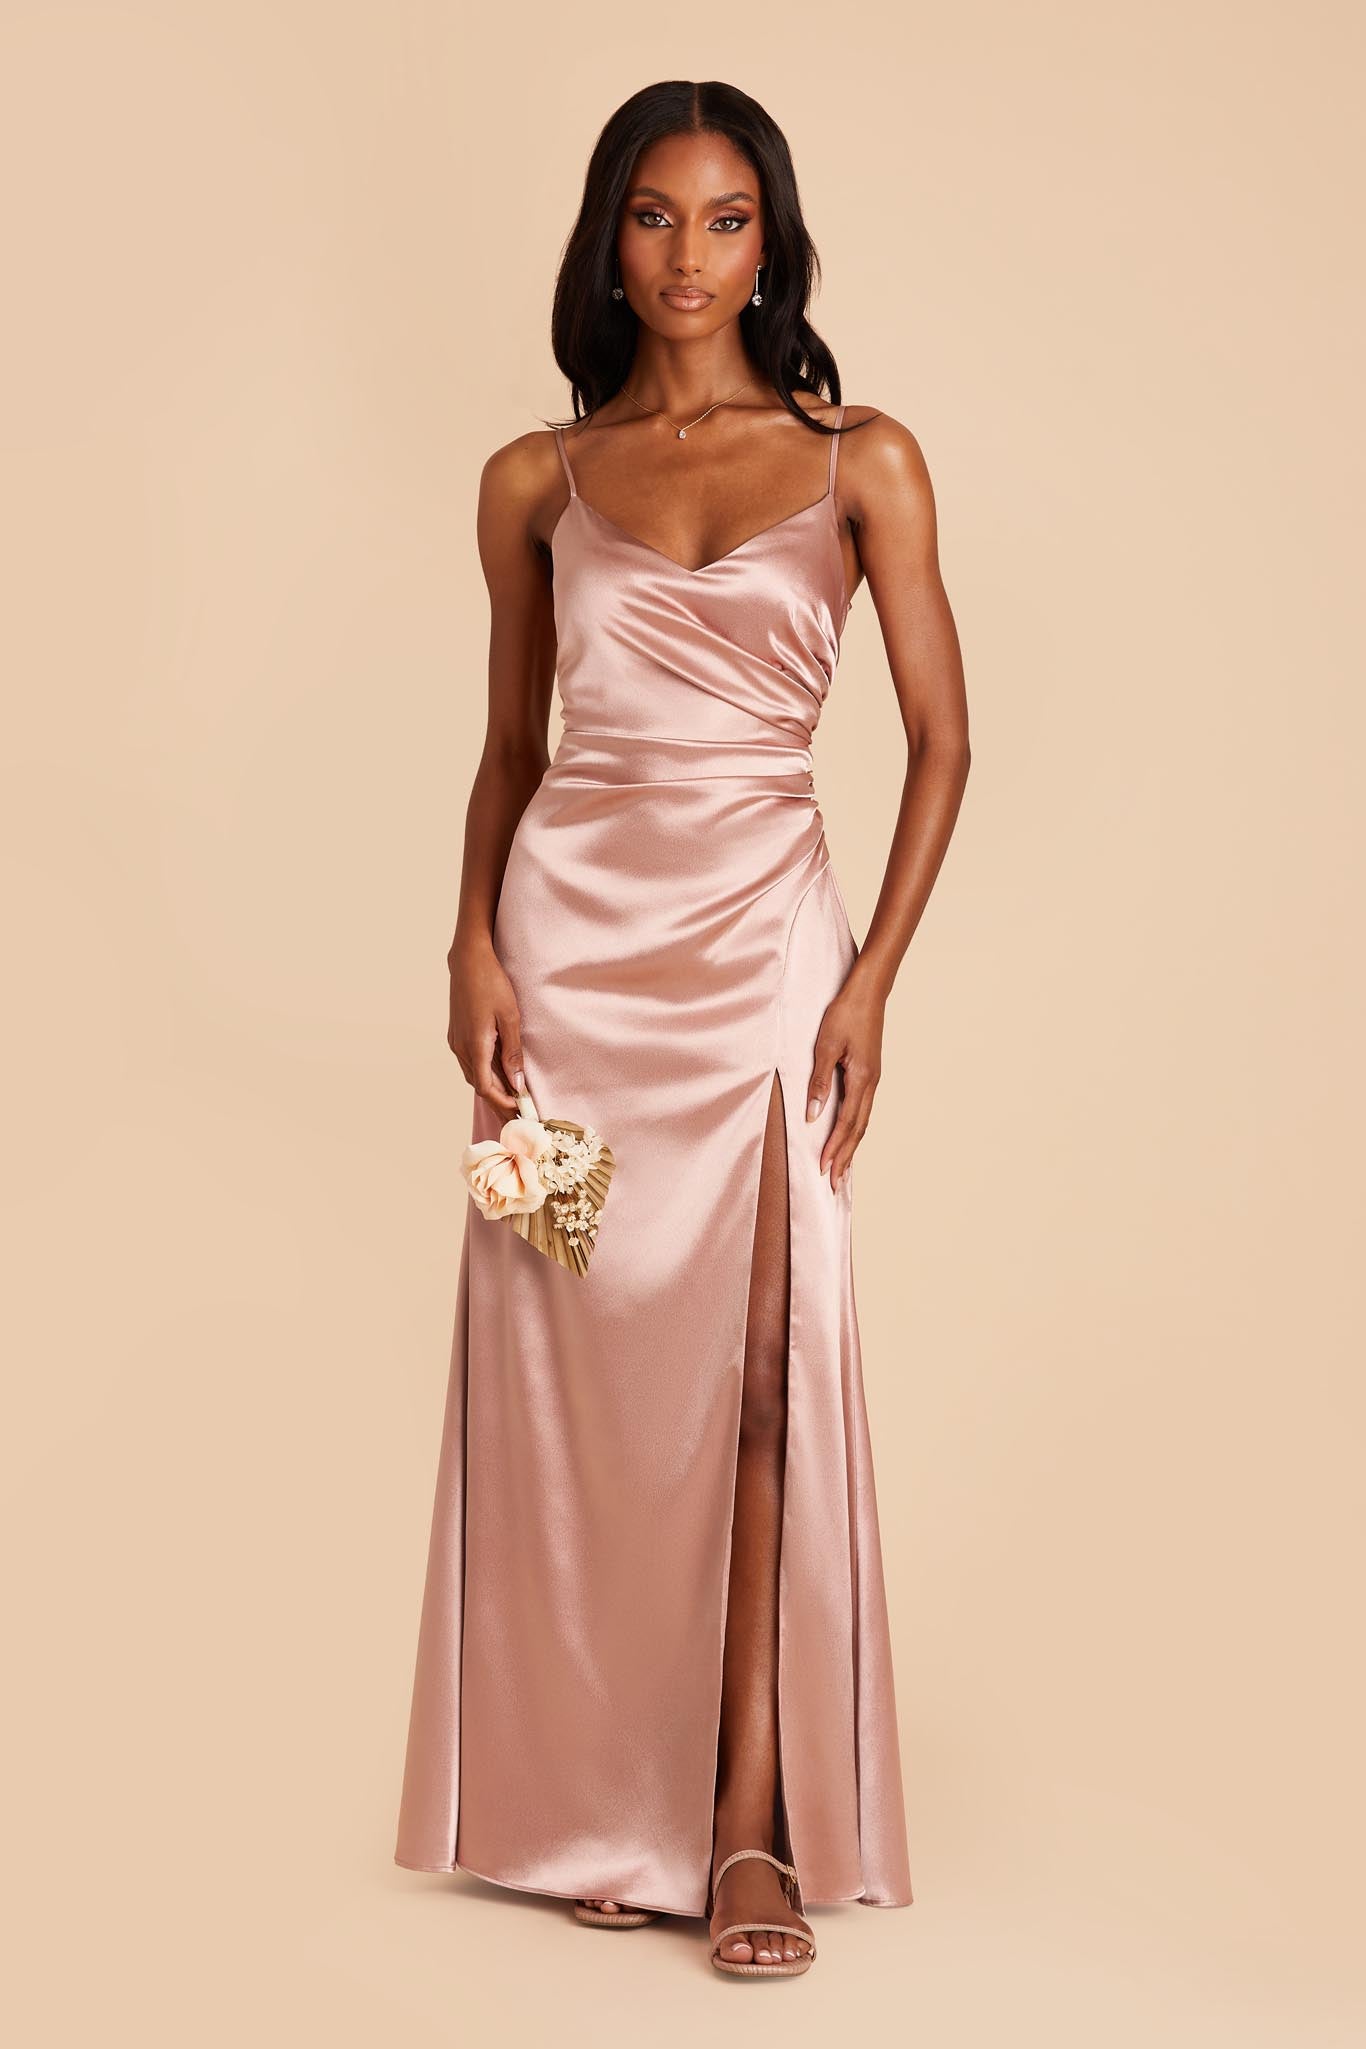 Sequin Bridesmaids Dresses: Gold, Neutral and Blush Sequined Dresses! -  Fashionably Yours Bridal & Formal Wear